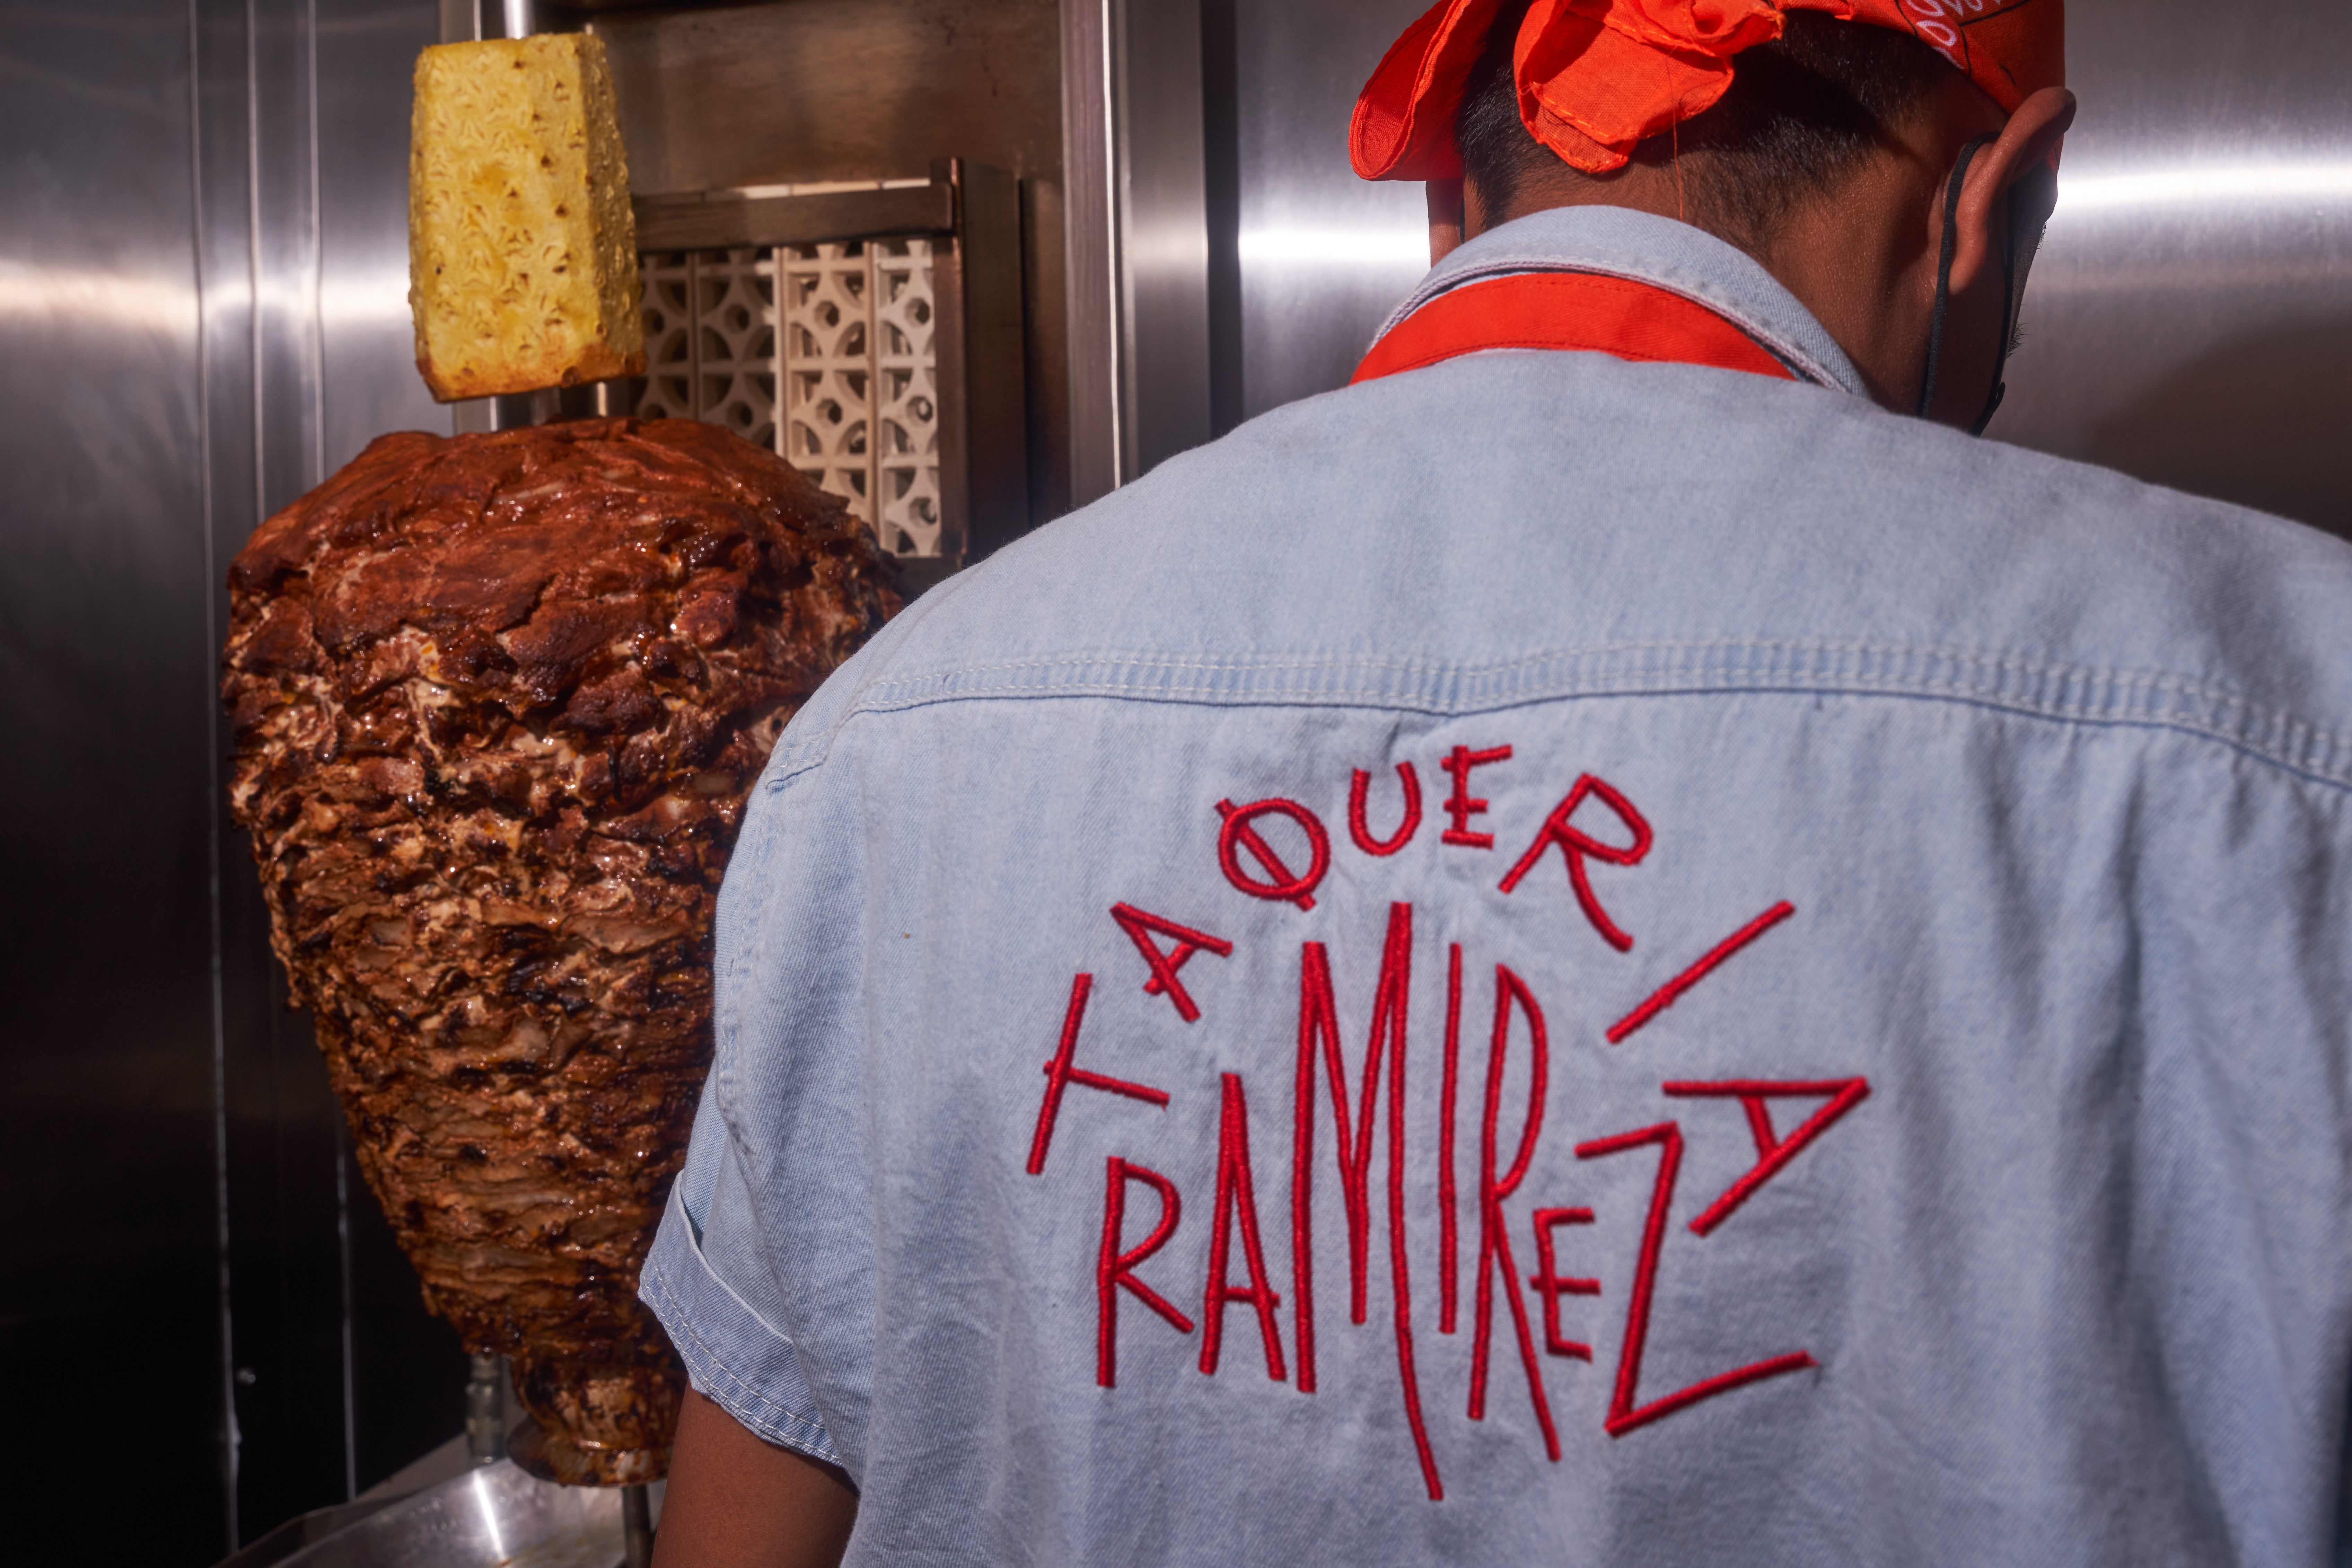 A man wearing a blue shirt with the words Taqueria Ramirez hand-stitched in red lettering stands behind an al pastor spit